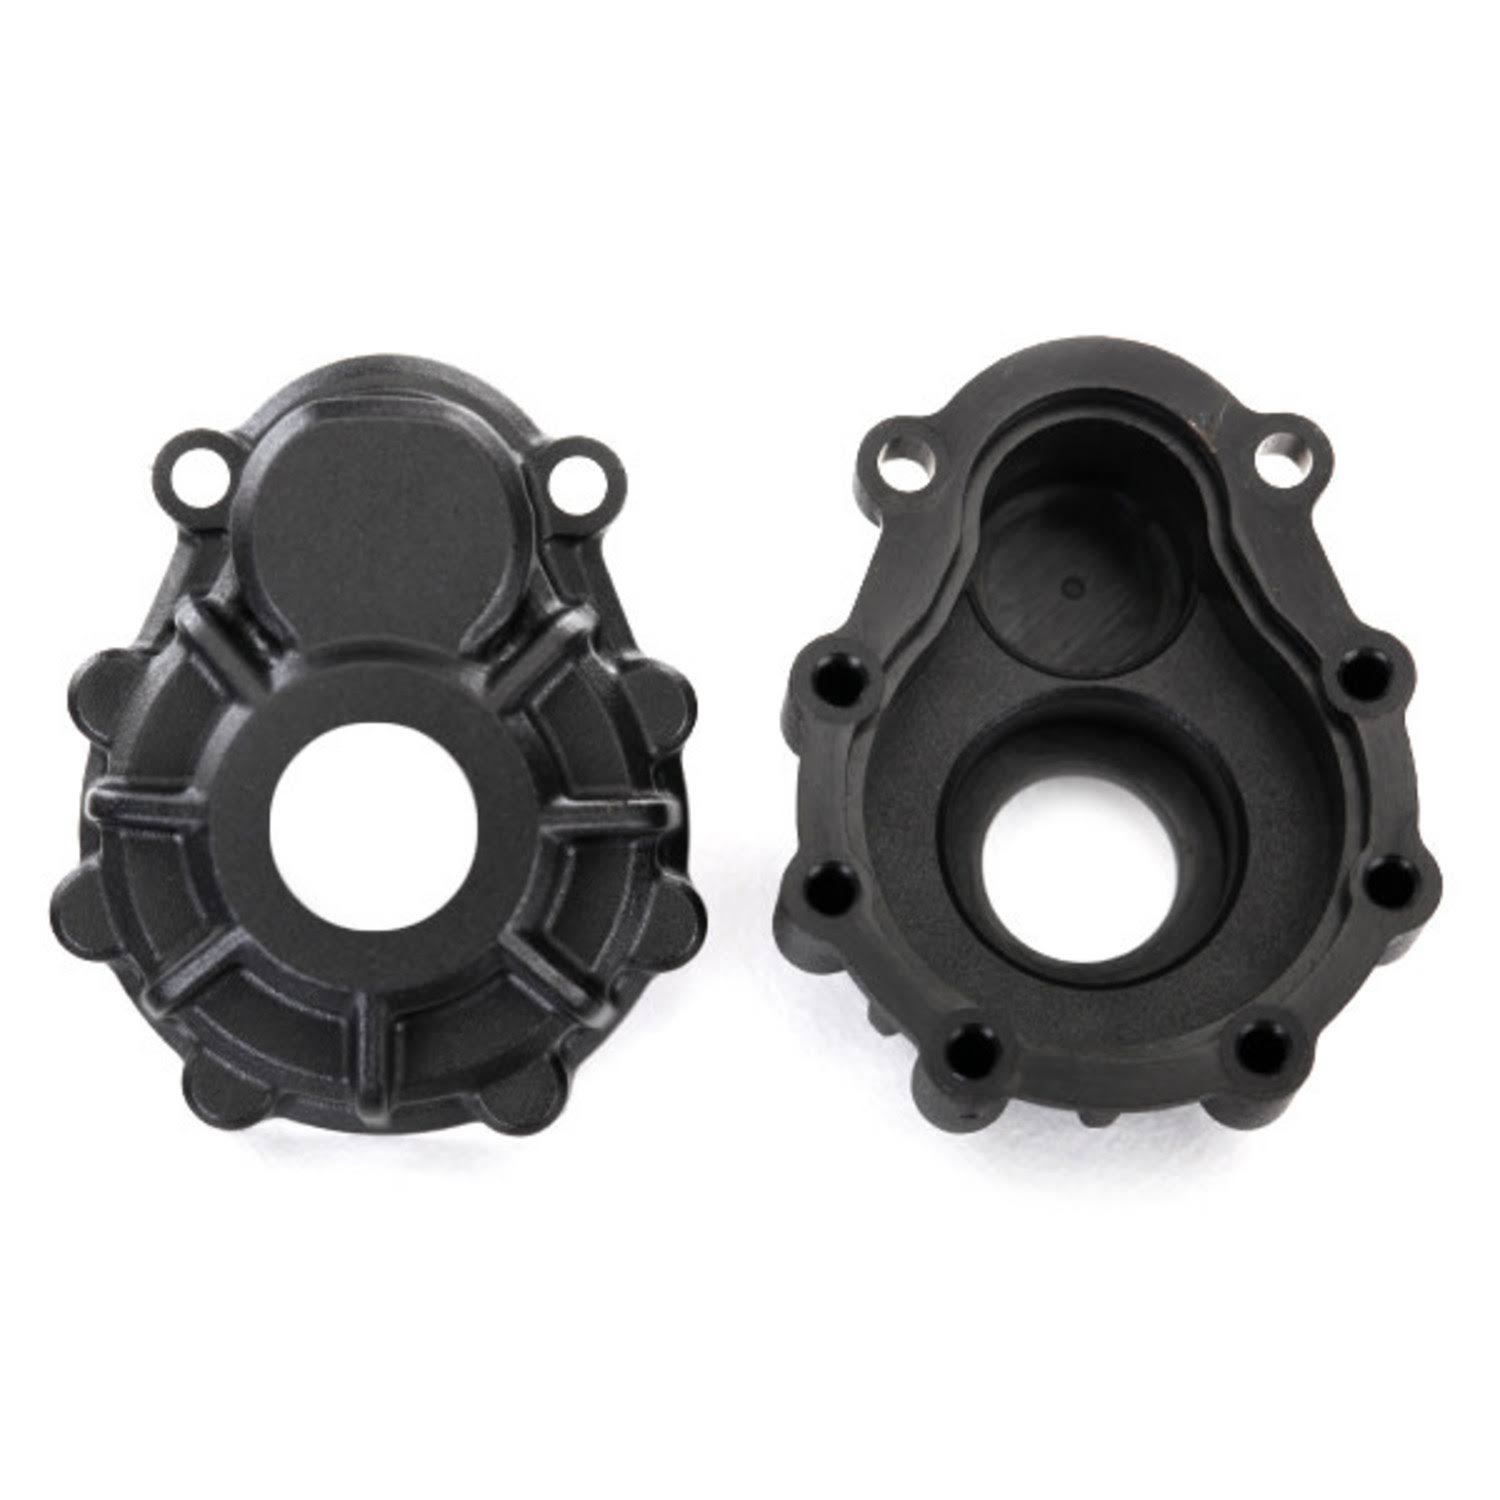 Traxxas 8251 TRX 4 RC Vehicle Portal Drive Housing - Outer Front or Rear, 2pk